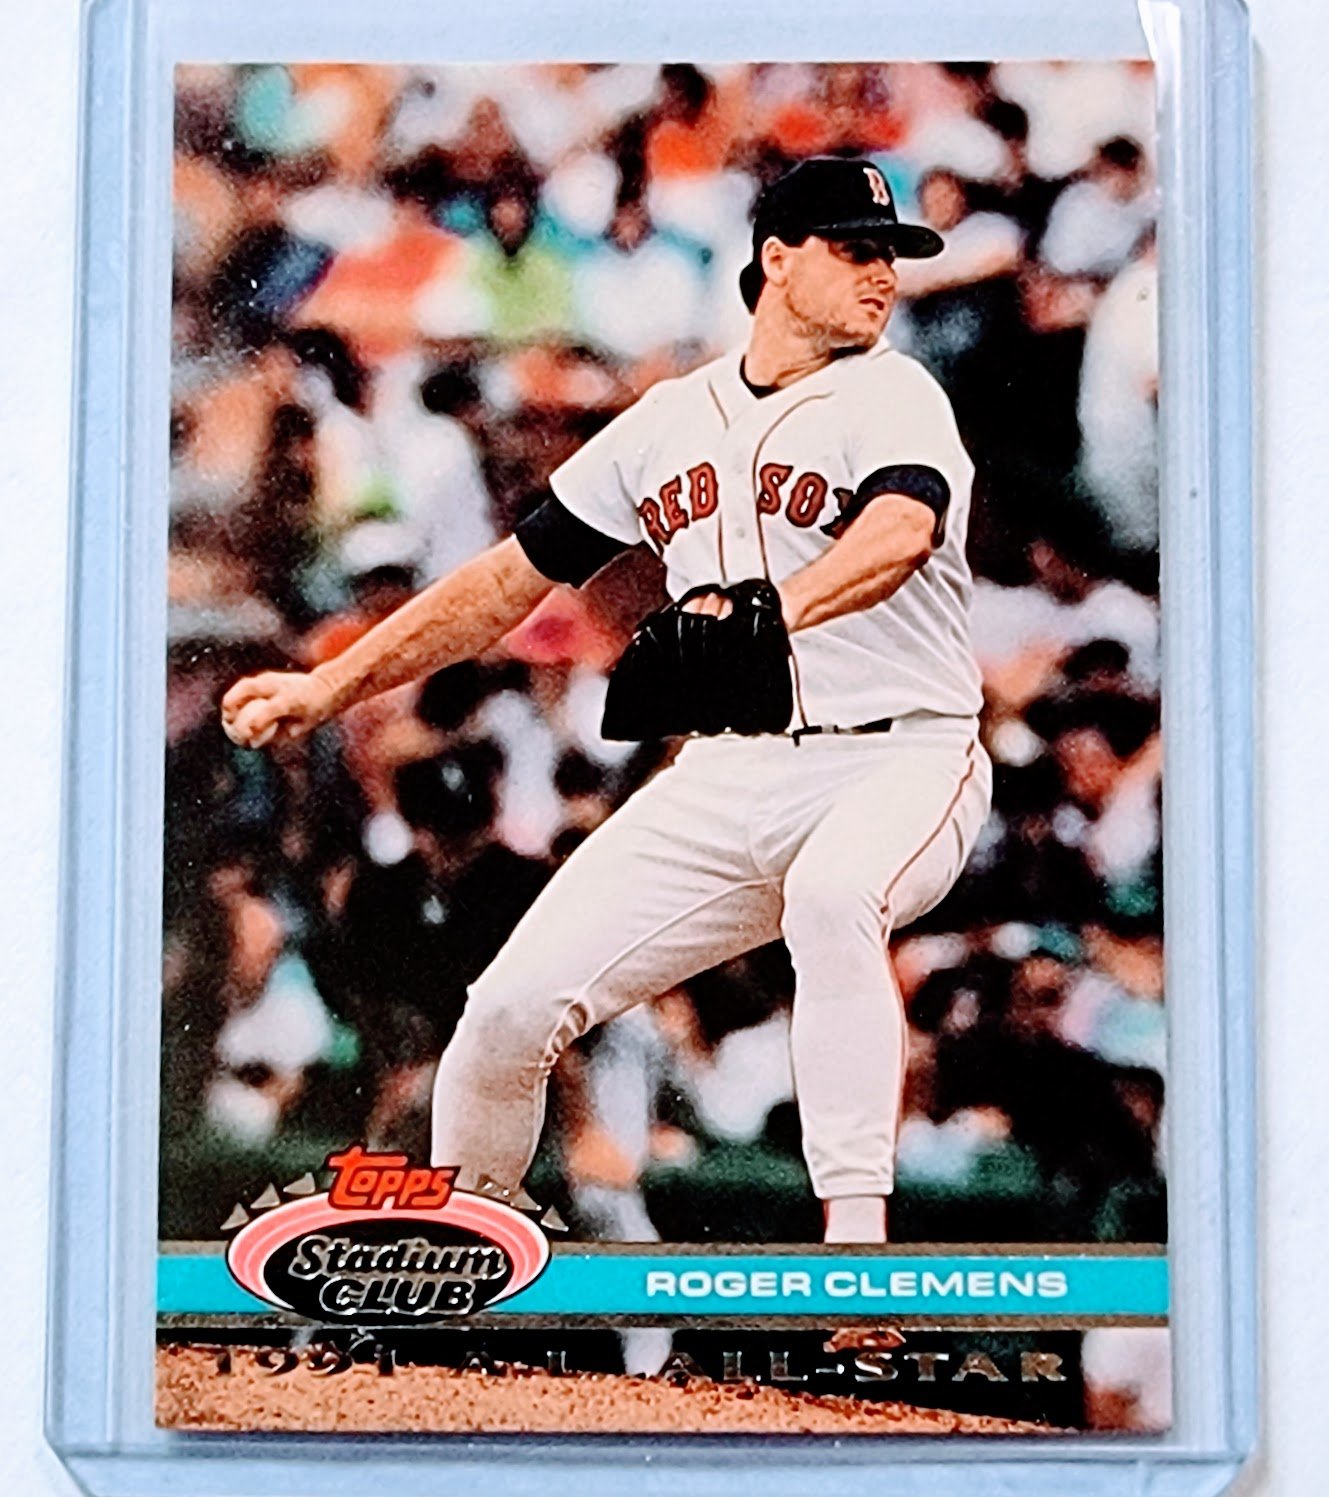 1992 Topps Stadium Club Dome Roger Clemens 1991 All Star MLB Baseball Trading Card TPTV simple Xclusive Collectibles   